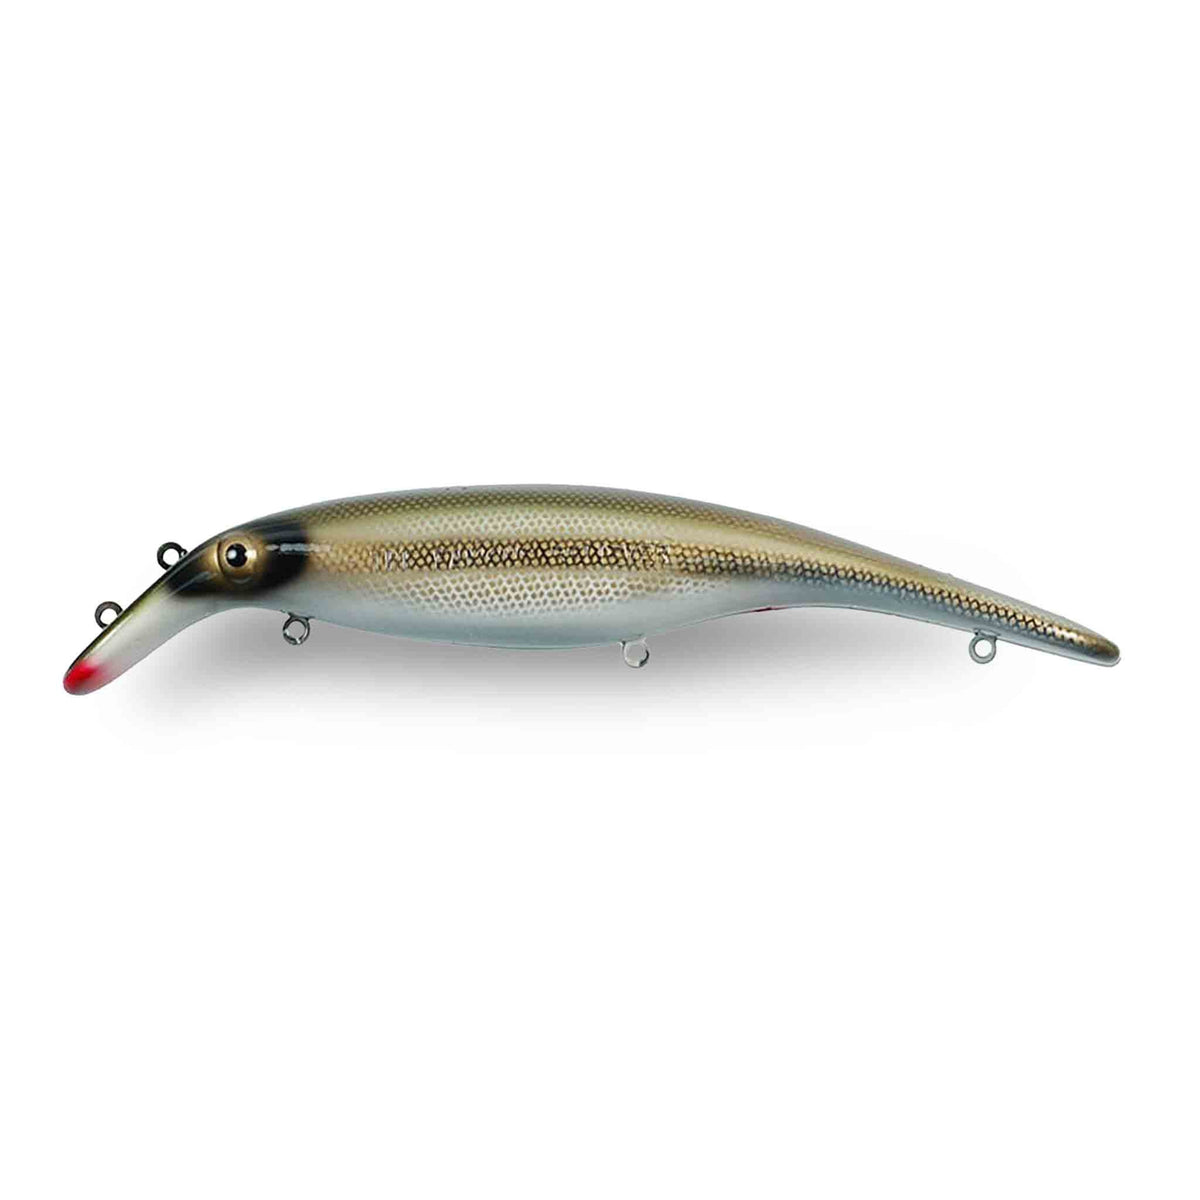 View of Crankbaits Drifter Tackle Believer Straight 8" Crankbait Sucker available at EZOKO Pike and Musky Shop